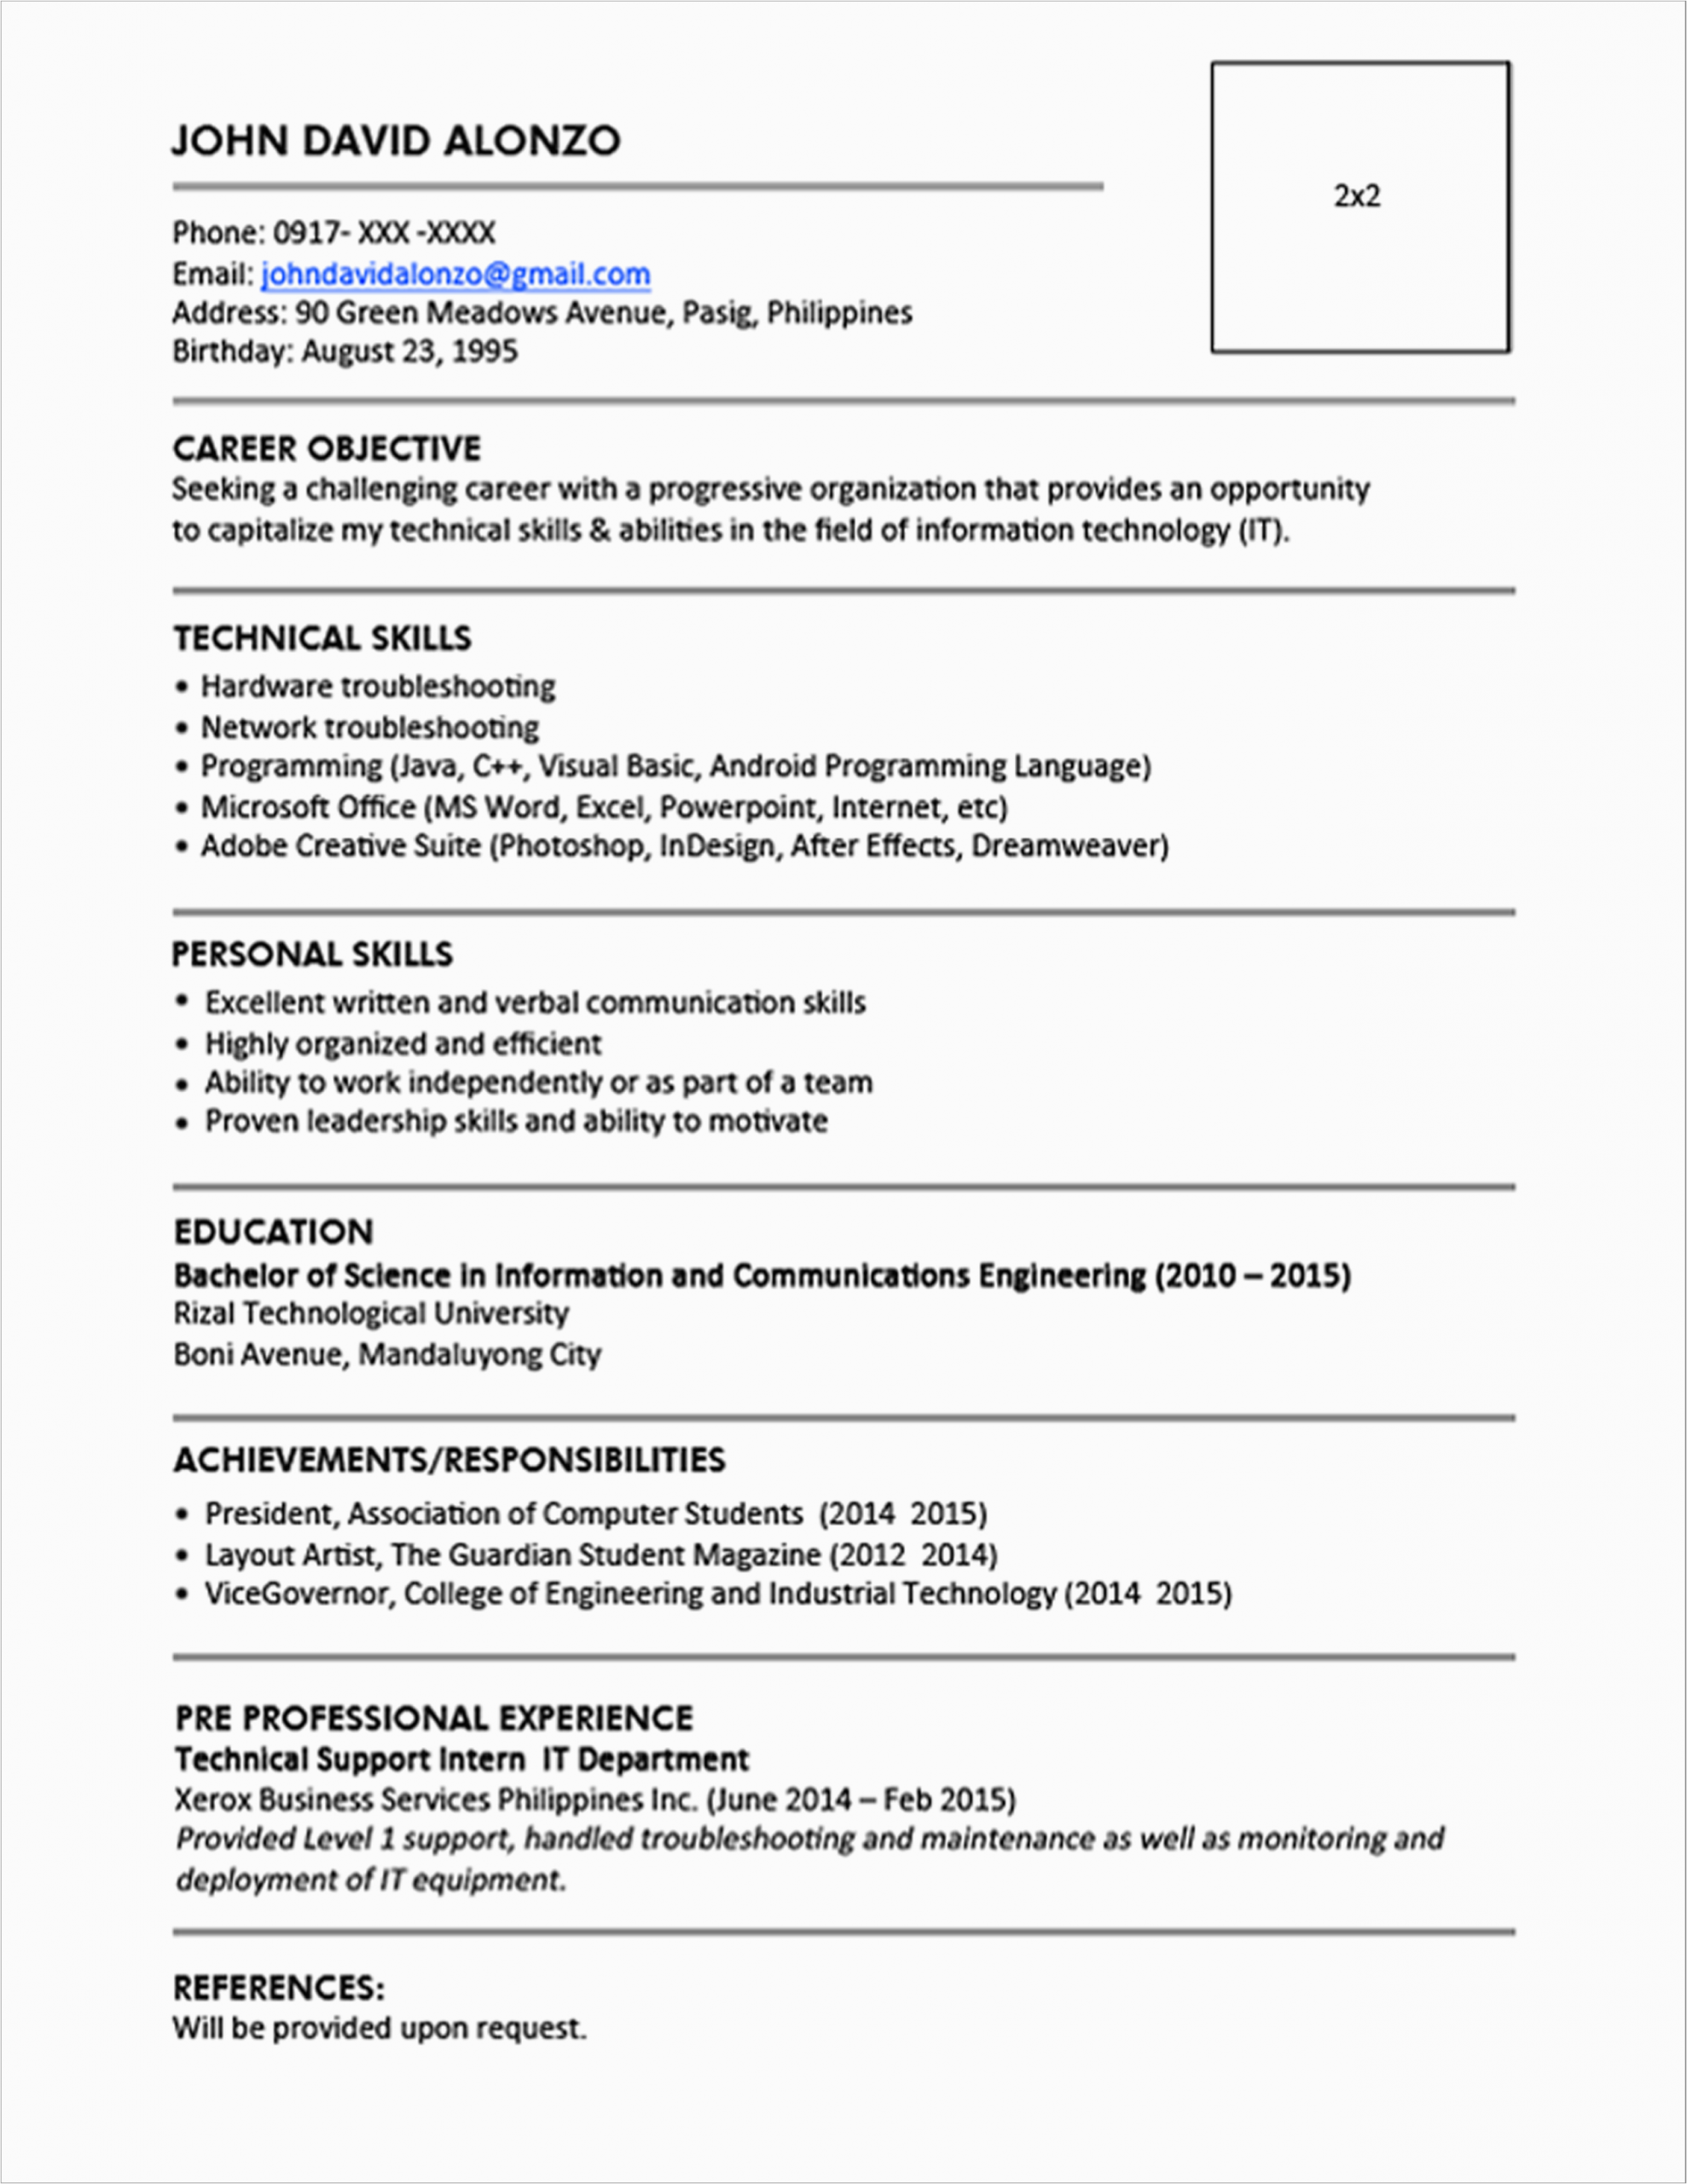 Sample Resume for Lawyers In the Philippines Sample Resume format for Fresh Graduates E Page format